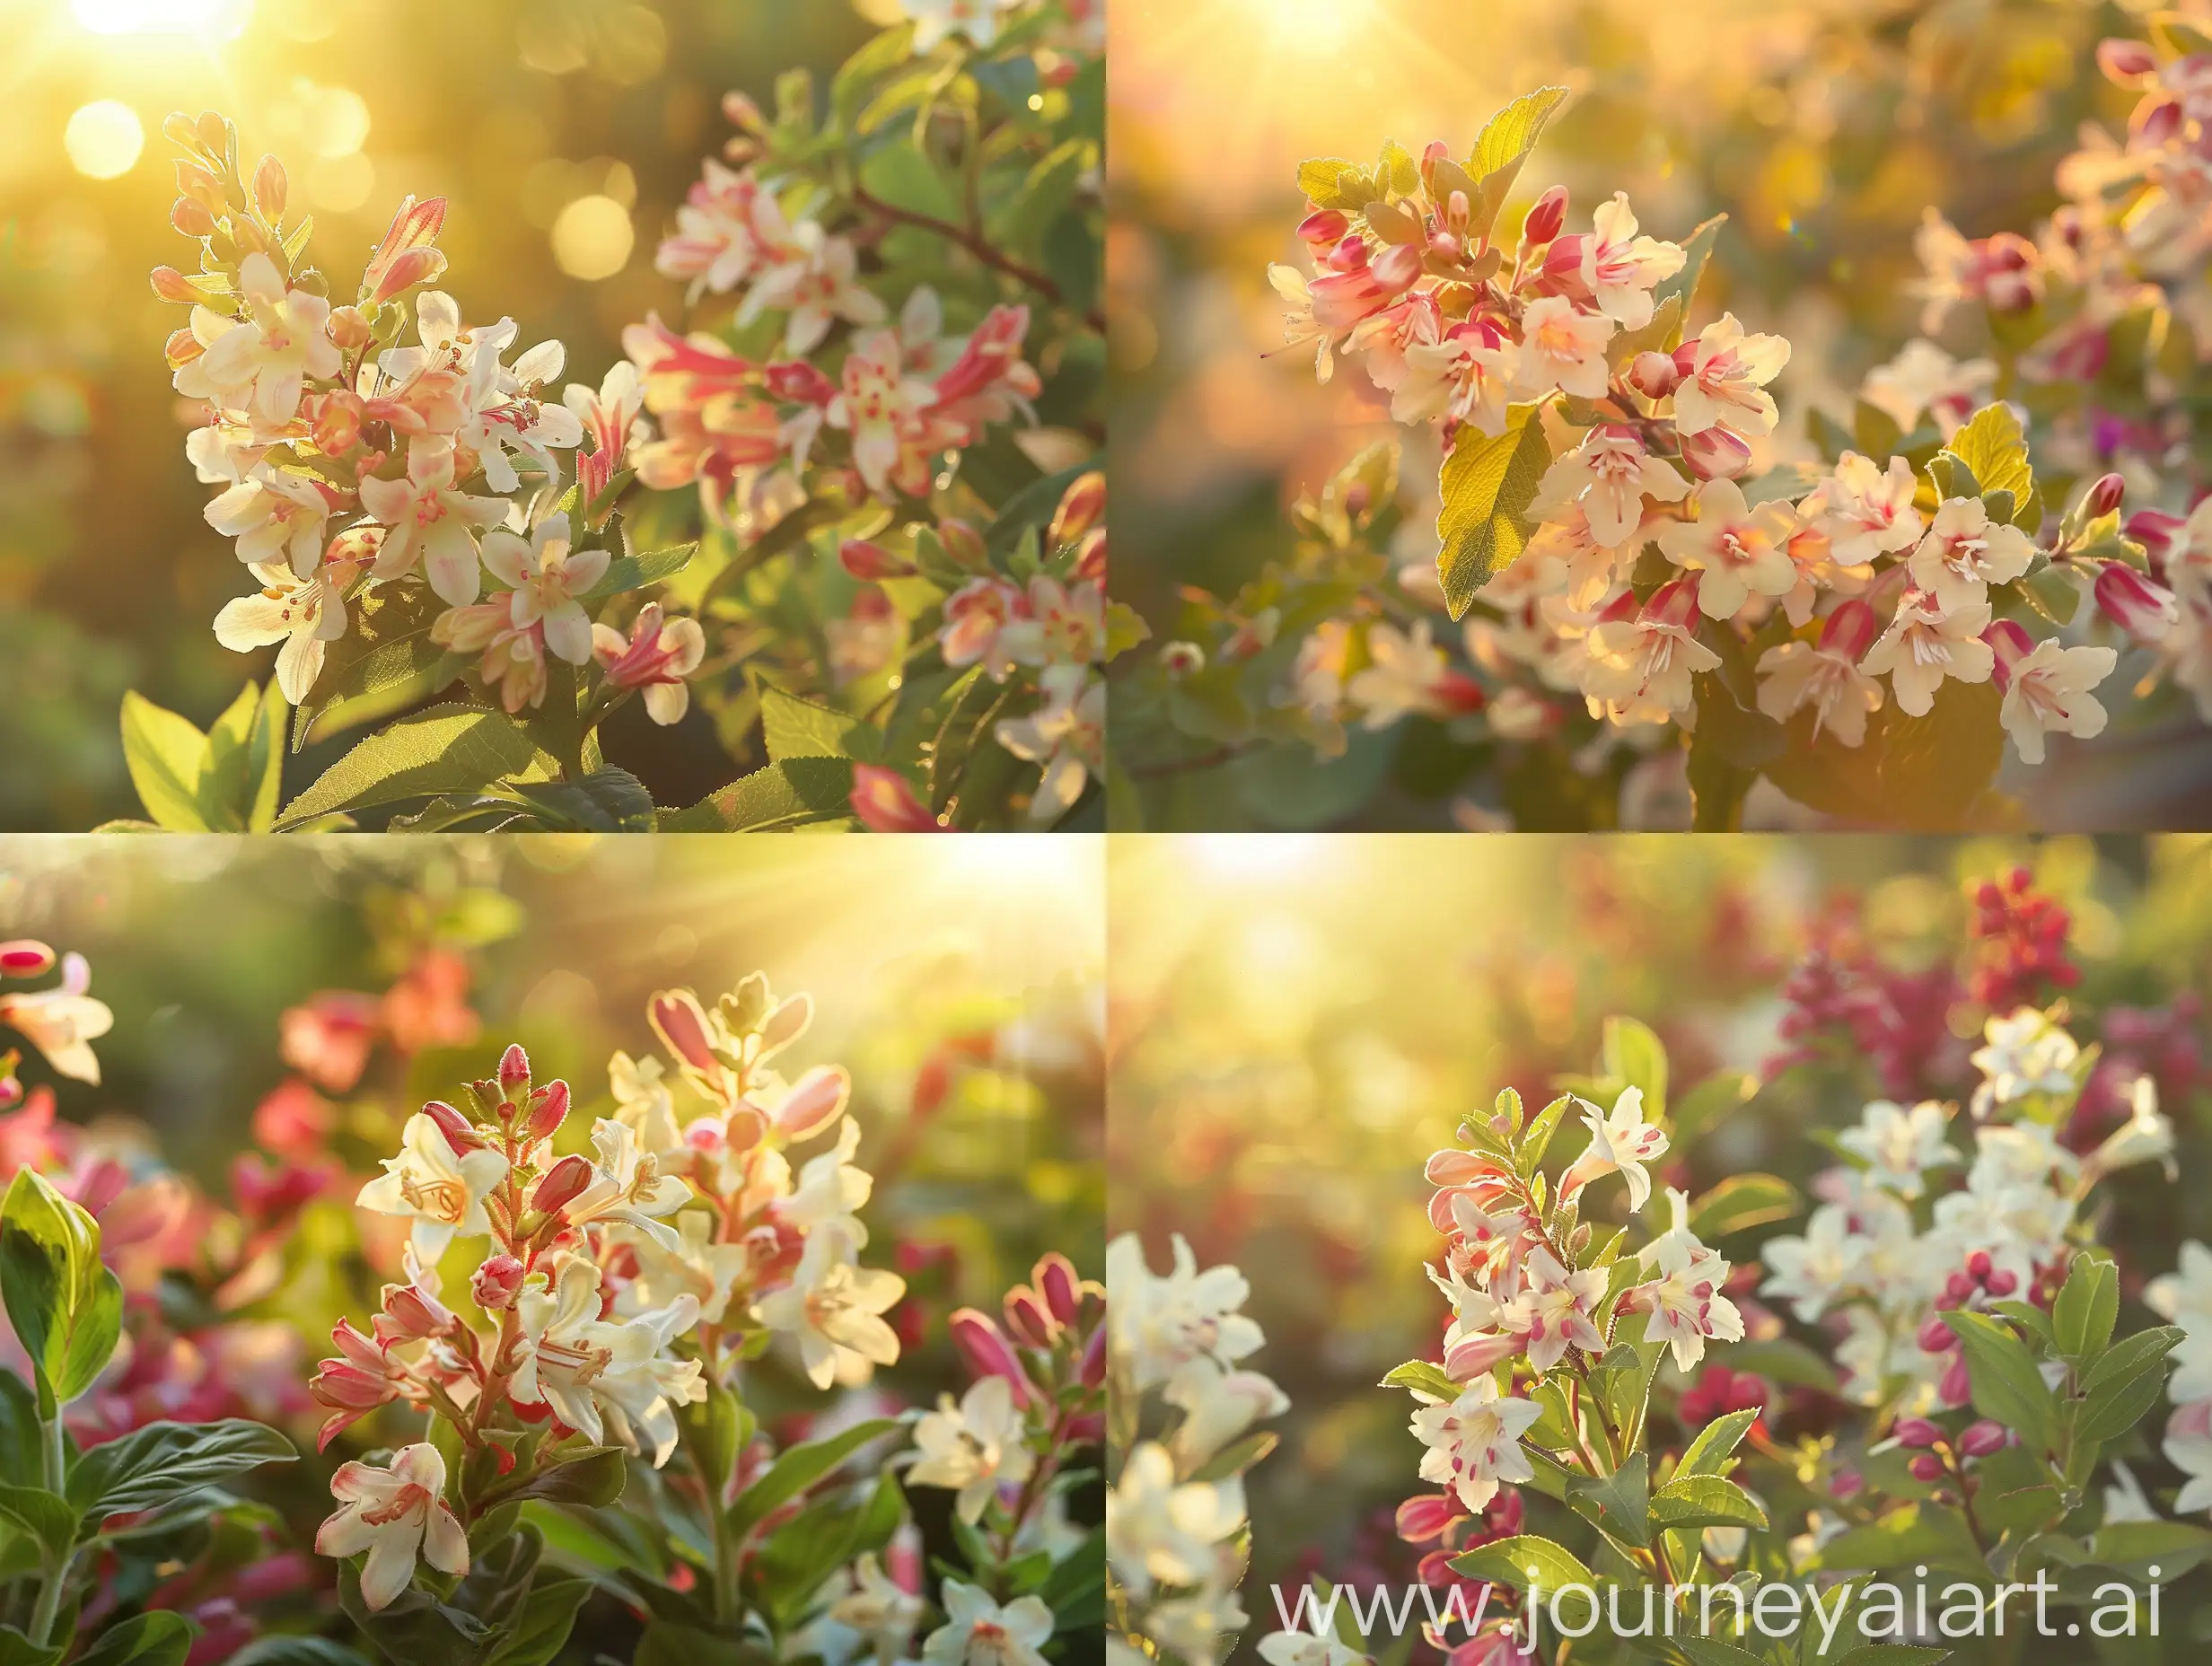 High detailed photo capturing a Weigela, Czechmark Trilogy®. The sun, casting a warm, golden glow, bathes the scene in a serene ambiance, illuminating the intricate details of each element. The composition centers on a Weigela, Czechmark Trilogy®. Large flowers in lovely hues of white, pink, and red present themselves in abundance in spring on this easy to grow hardy shrub. Deer-resistant plants stay compact and attractive all season long, with glossy green foliage, and are superb additions to pere. The image evokes a sense of tranquility and natural beauty, inviting viewers to immerse themselves in the splendor of the landscape. --ar 16:9 